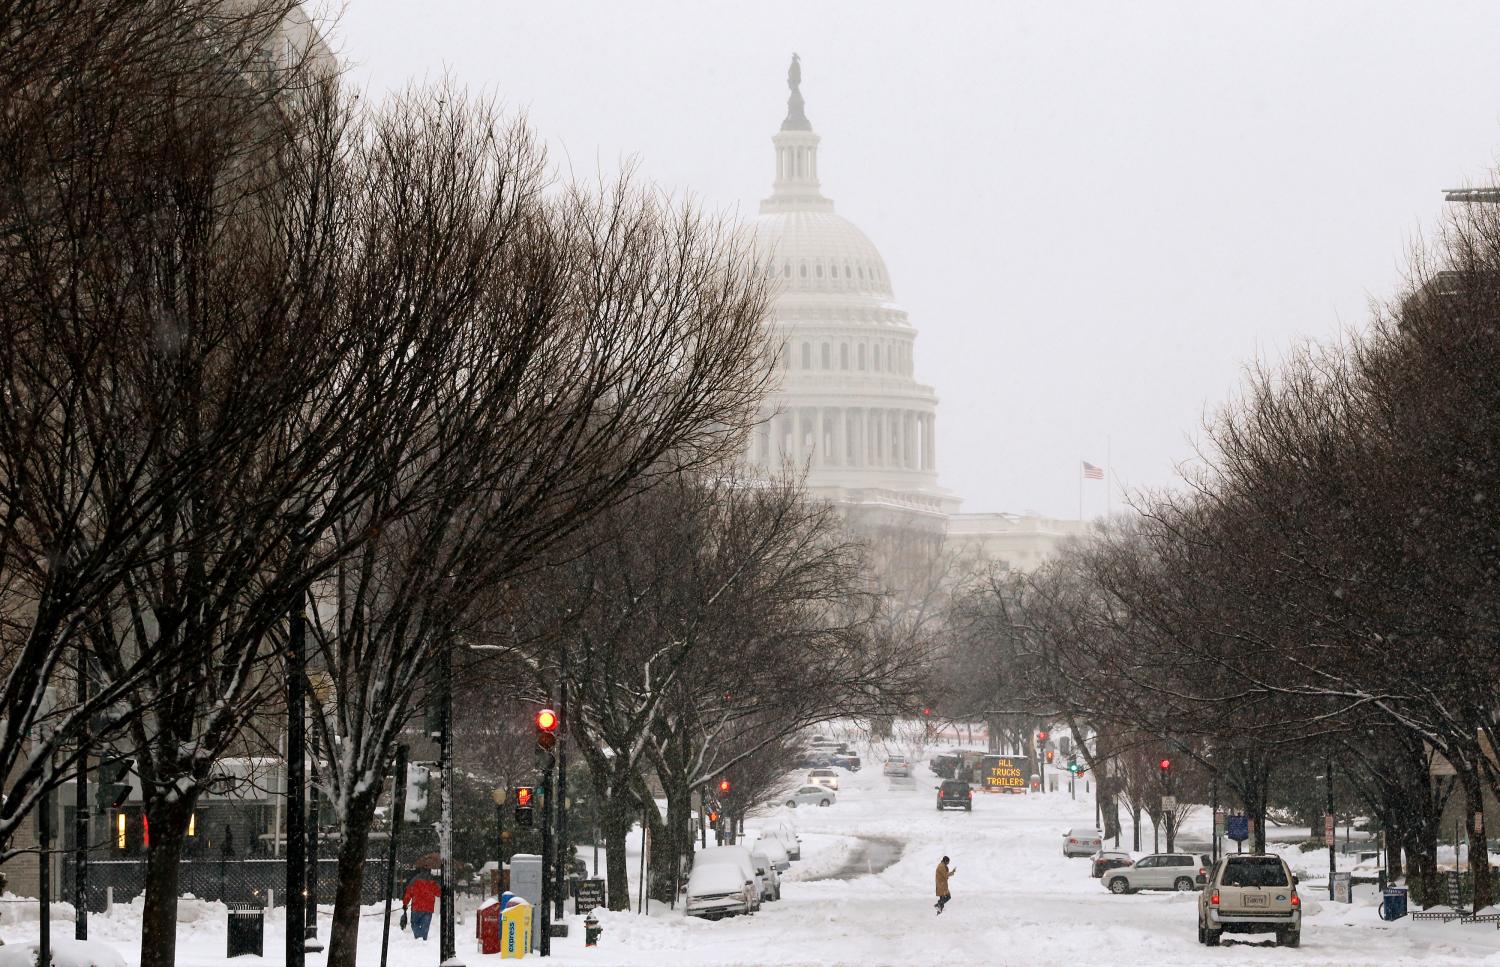 A pedestrian walks across New Jersey Avenue in front of the U.S. Capitol building, on largely deserted streets, as a major snow storm hits the Washington area, closing U.S. Federal Government offices for the day and shutting down much of the city of Washington February 13, 2014. A deadly and intensifying winter storm packing heavy snow, sleet and rain pelted a huge swath of the U.S. East Coast on Thursday, grounding flights and shuttering schools and government offices. REUTERS/Jim Bourg (UNITED STATES - Tags: ENVIRONMENT POLITICS) - GM1EA2D1QAN01